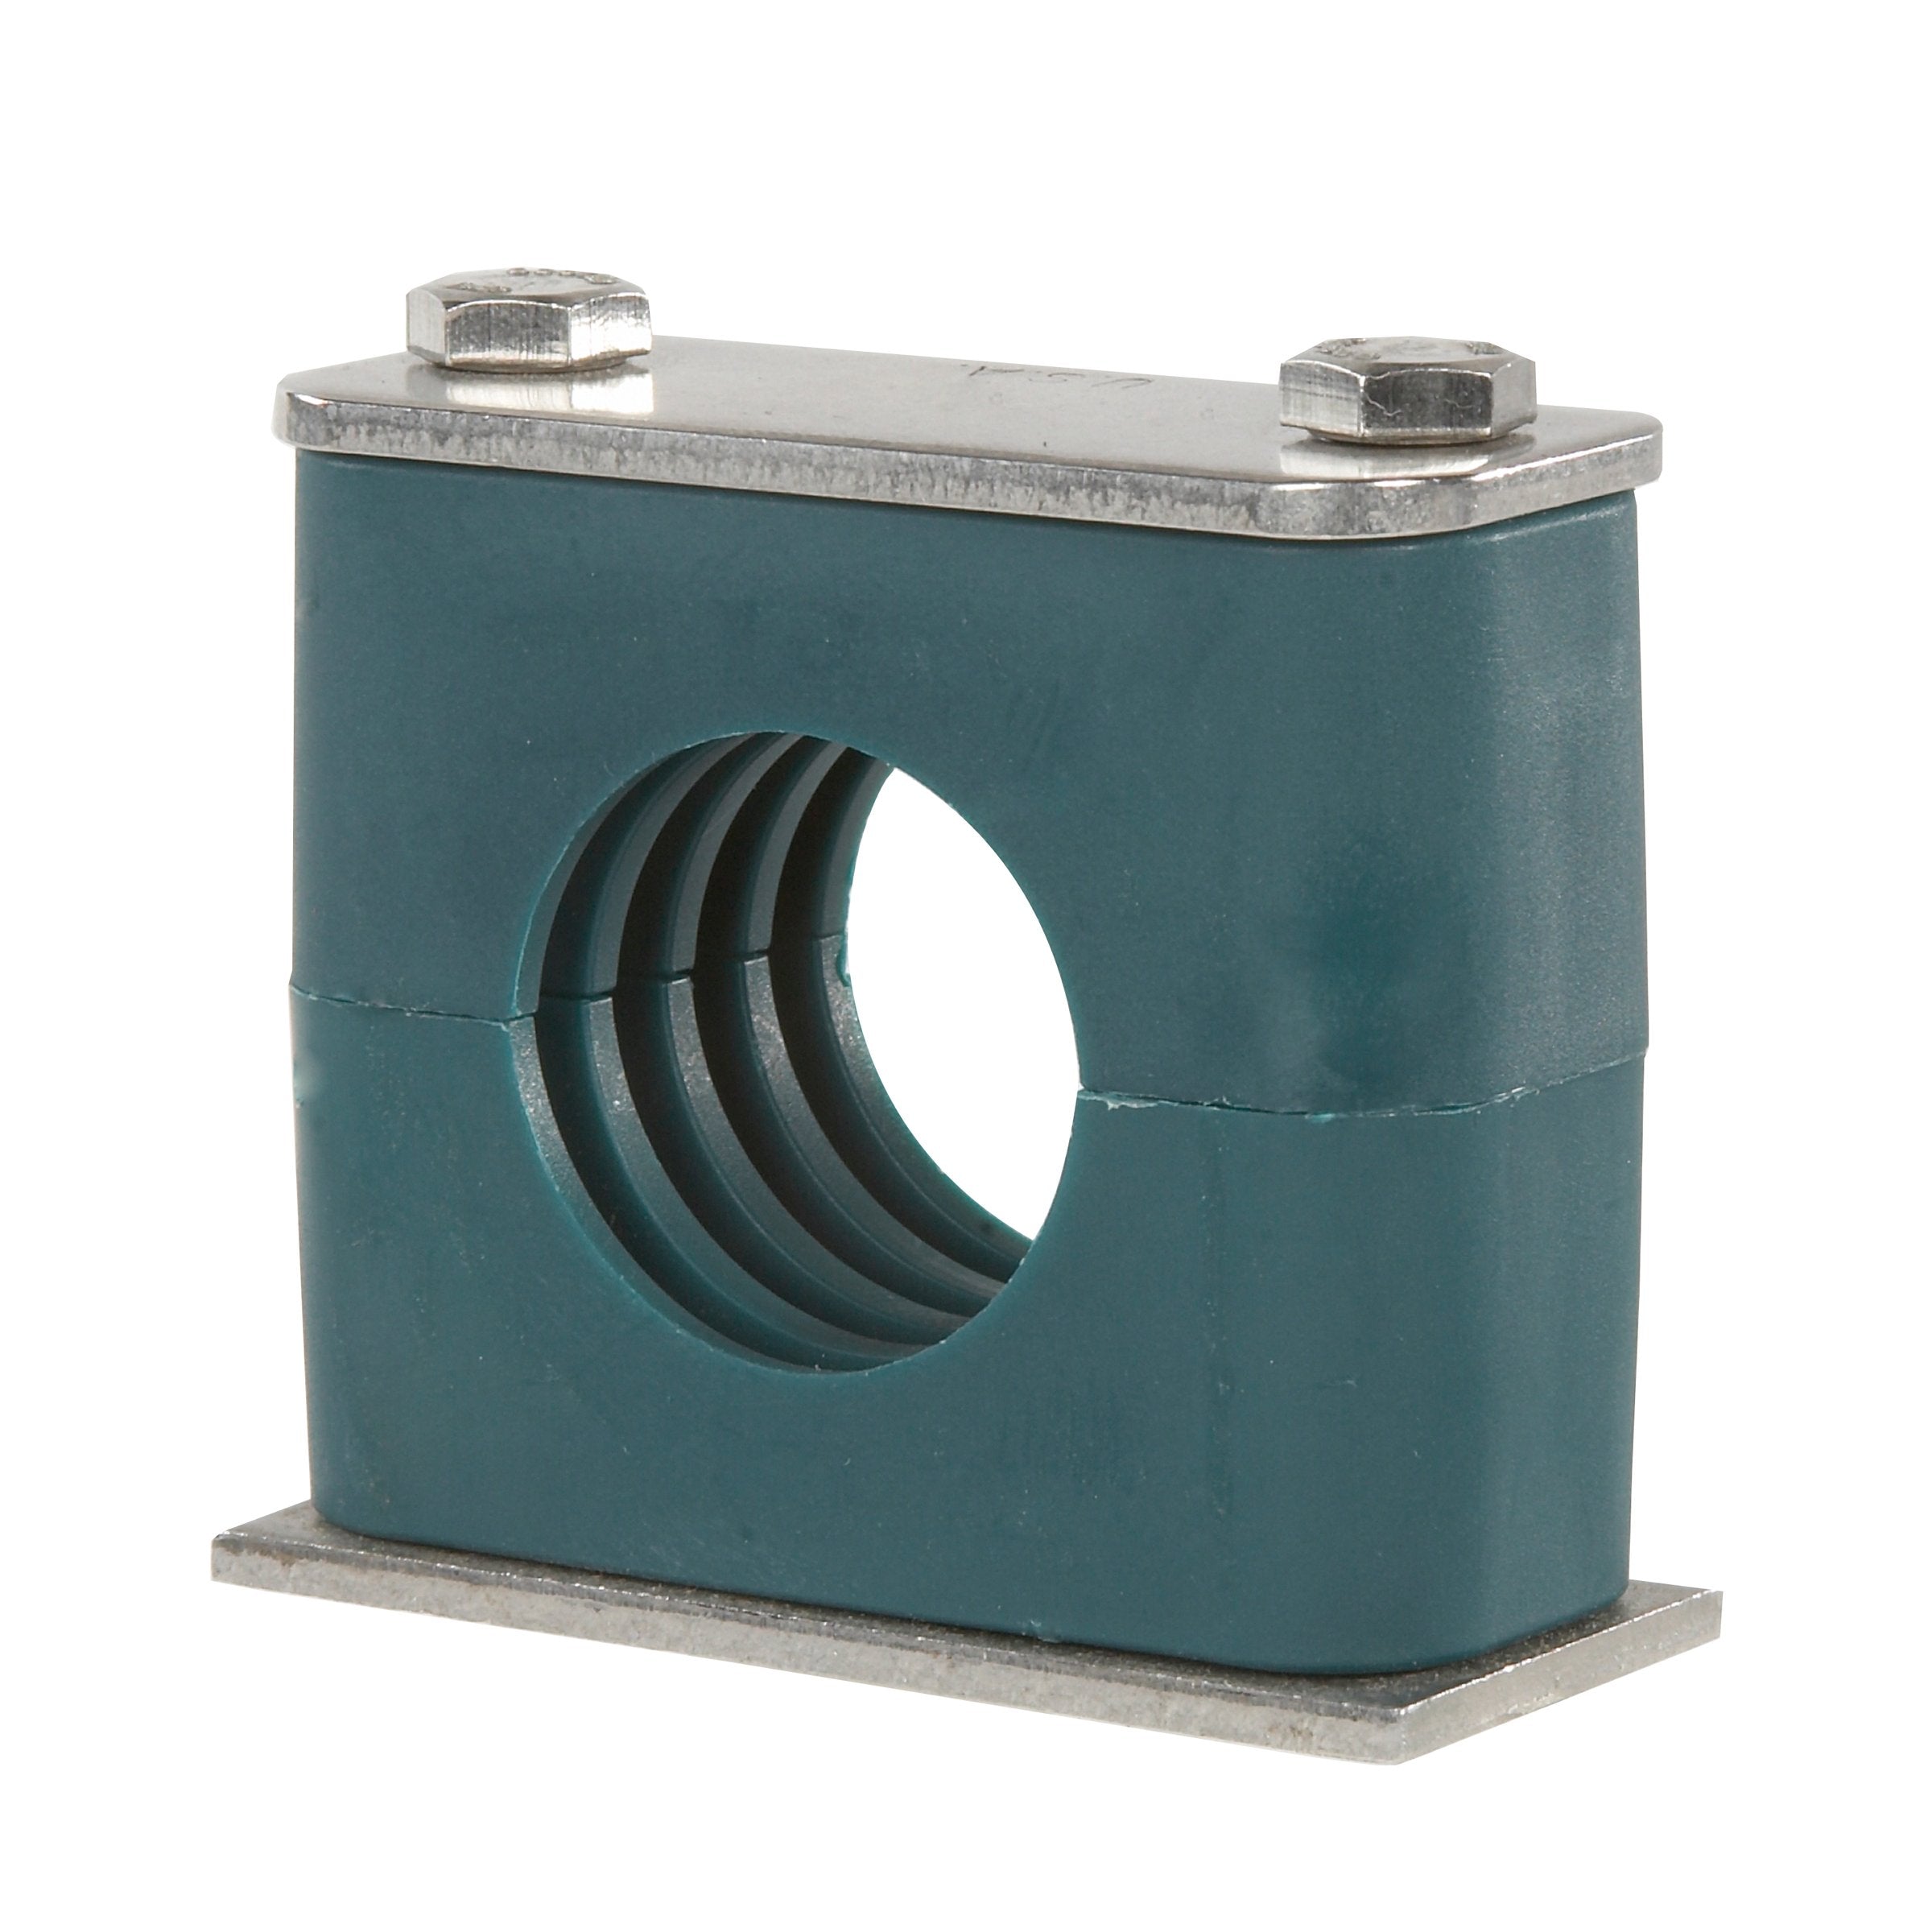 SP-650.8-PP-DP-AS-U-W5 : Stauff Clamp, Single Weld Plate, 2 inch (50.8mm) OD, for 2" Tube, Green PP Insert, Profiled Interior, 316SS